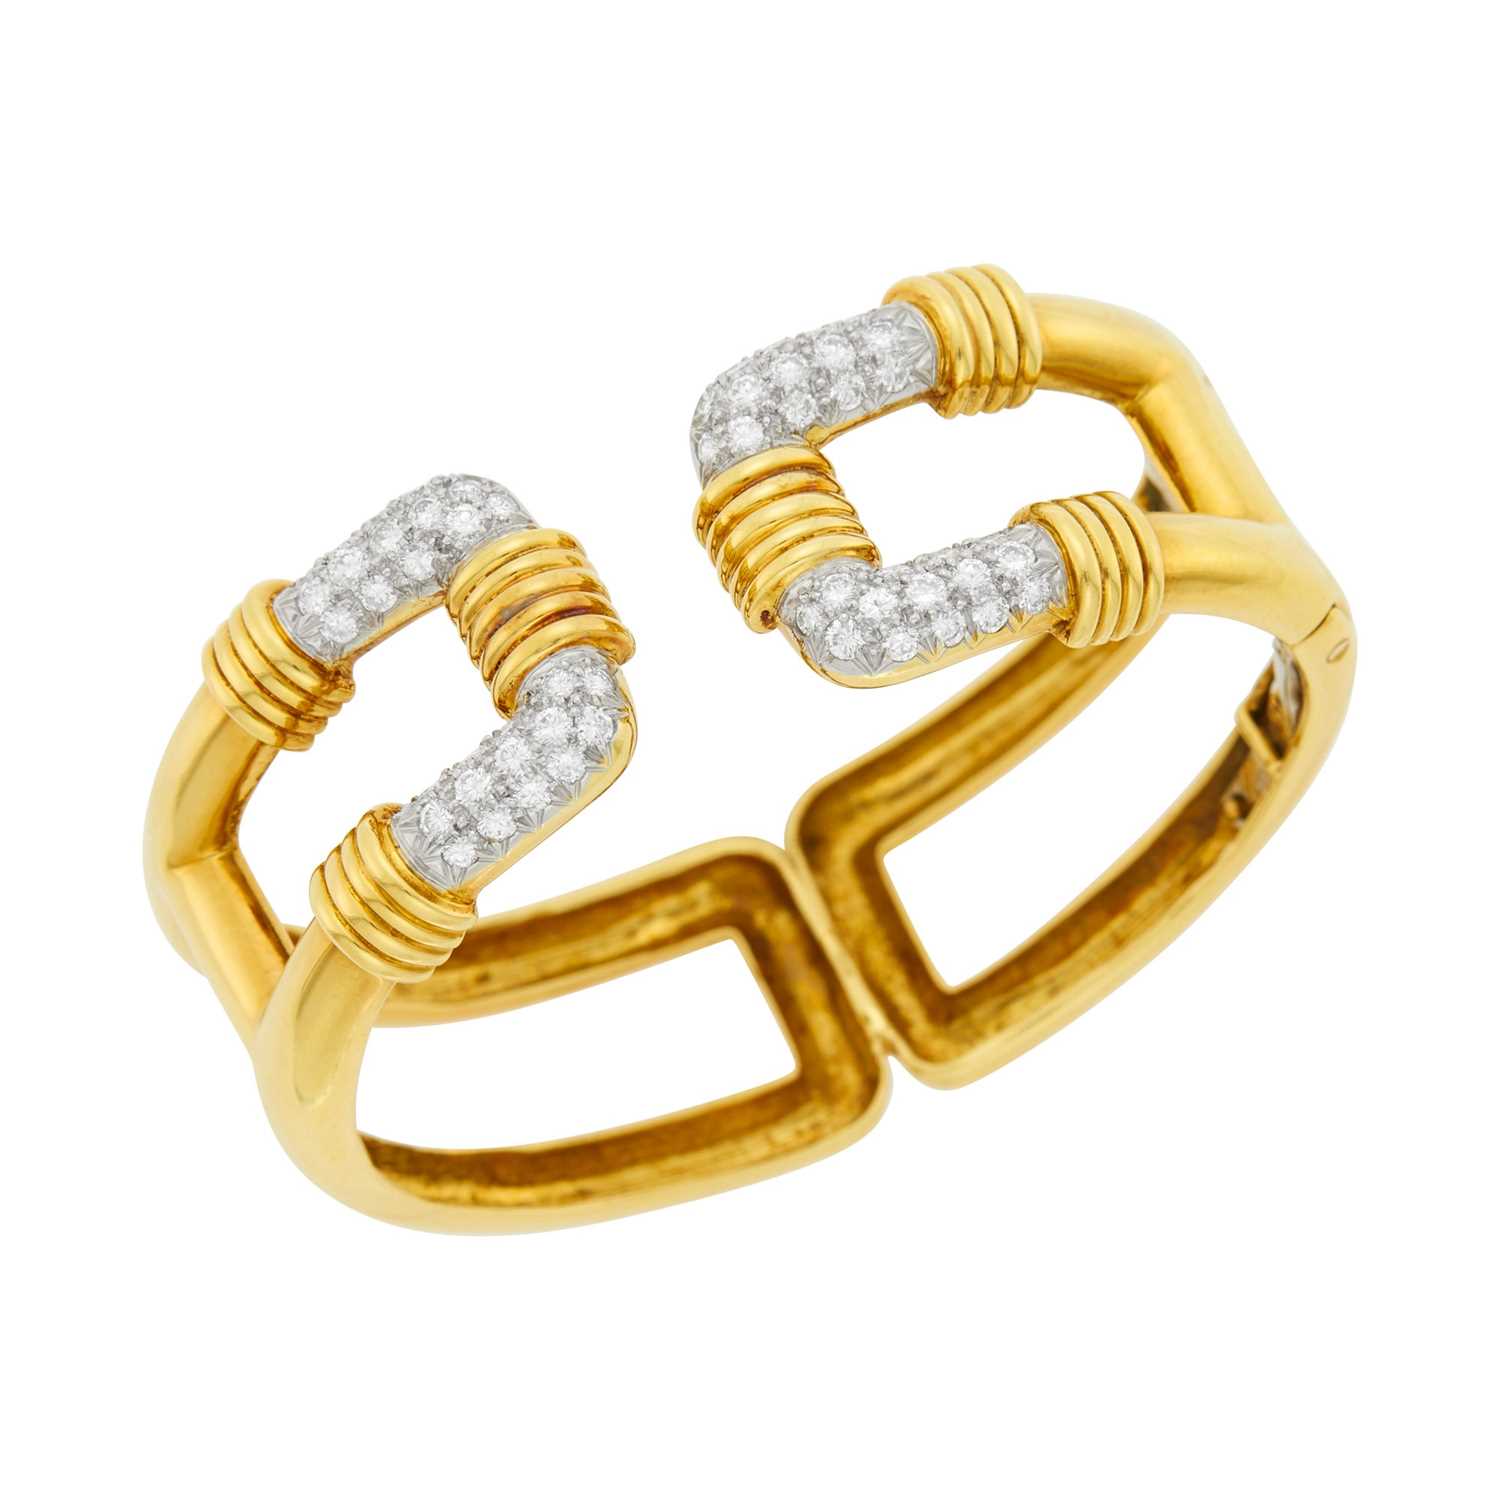 Lot 116 - Two-Color Gold and Diamond Cuff Bangle Bracelet